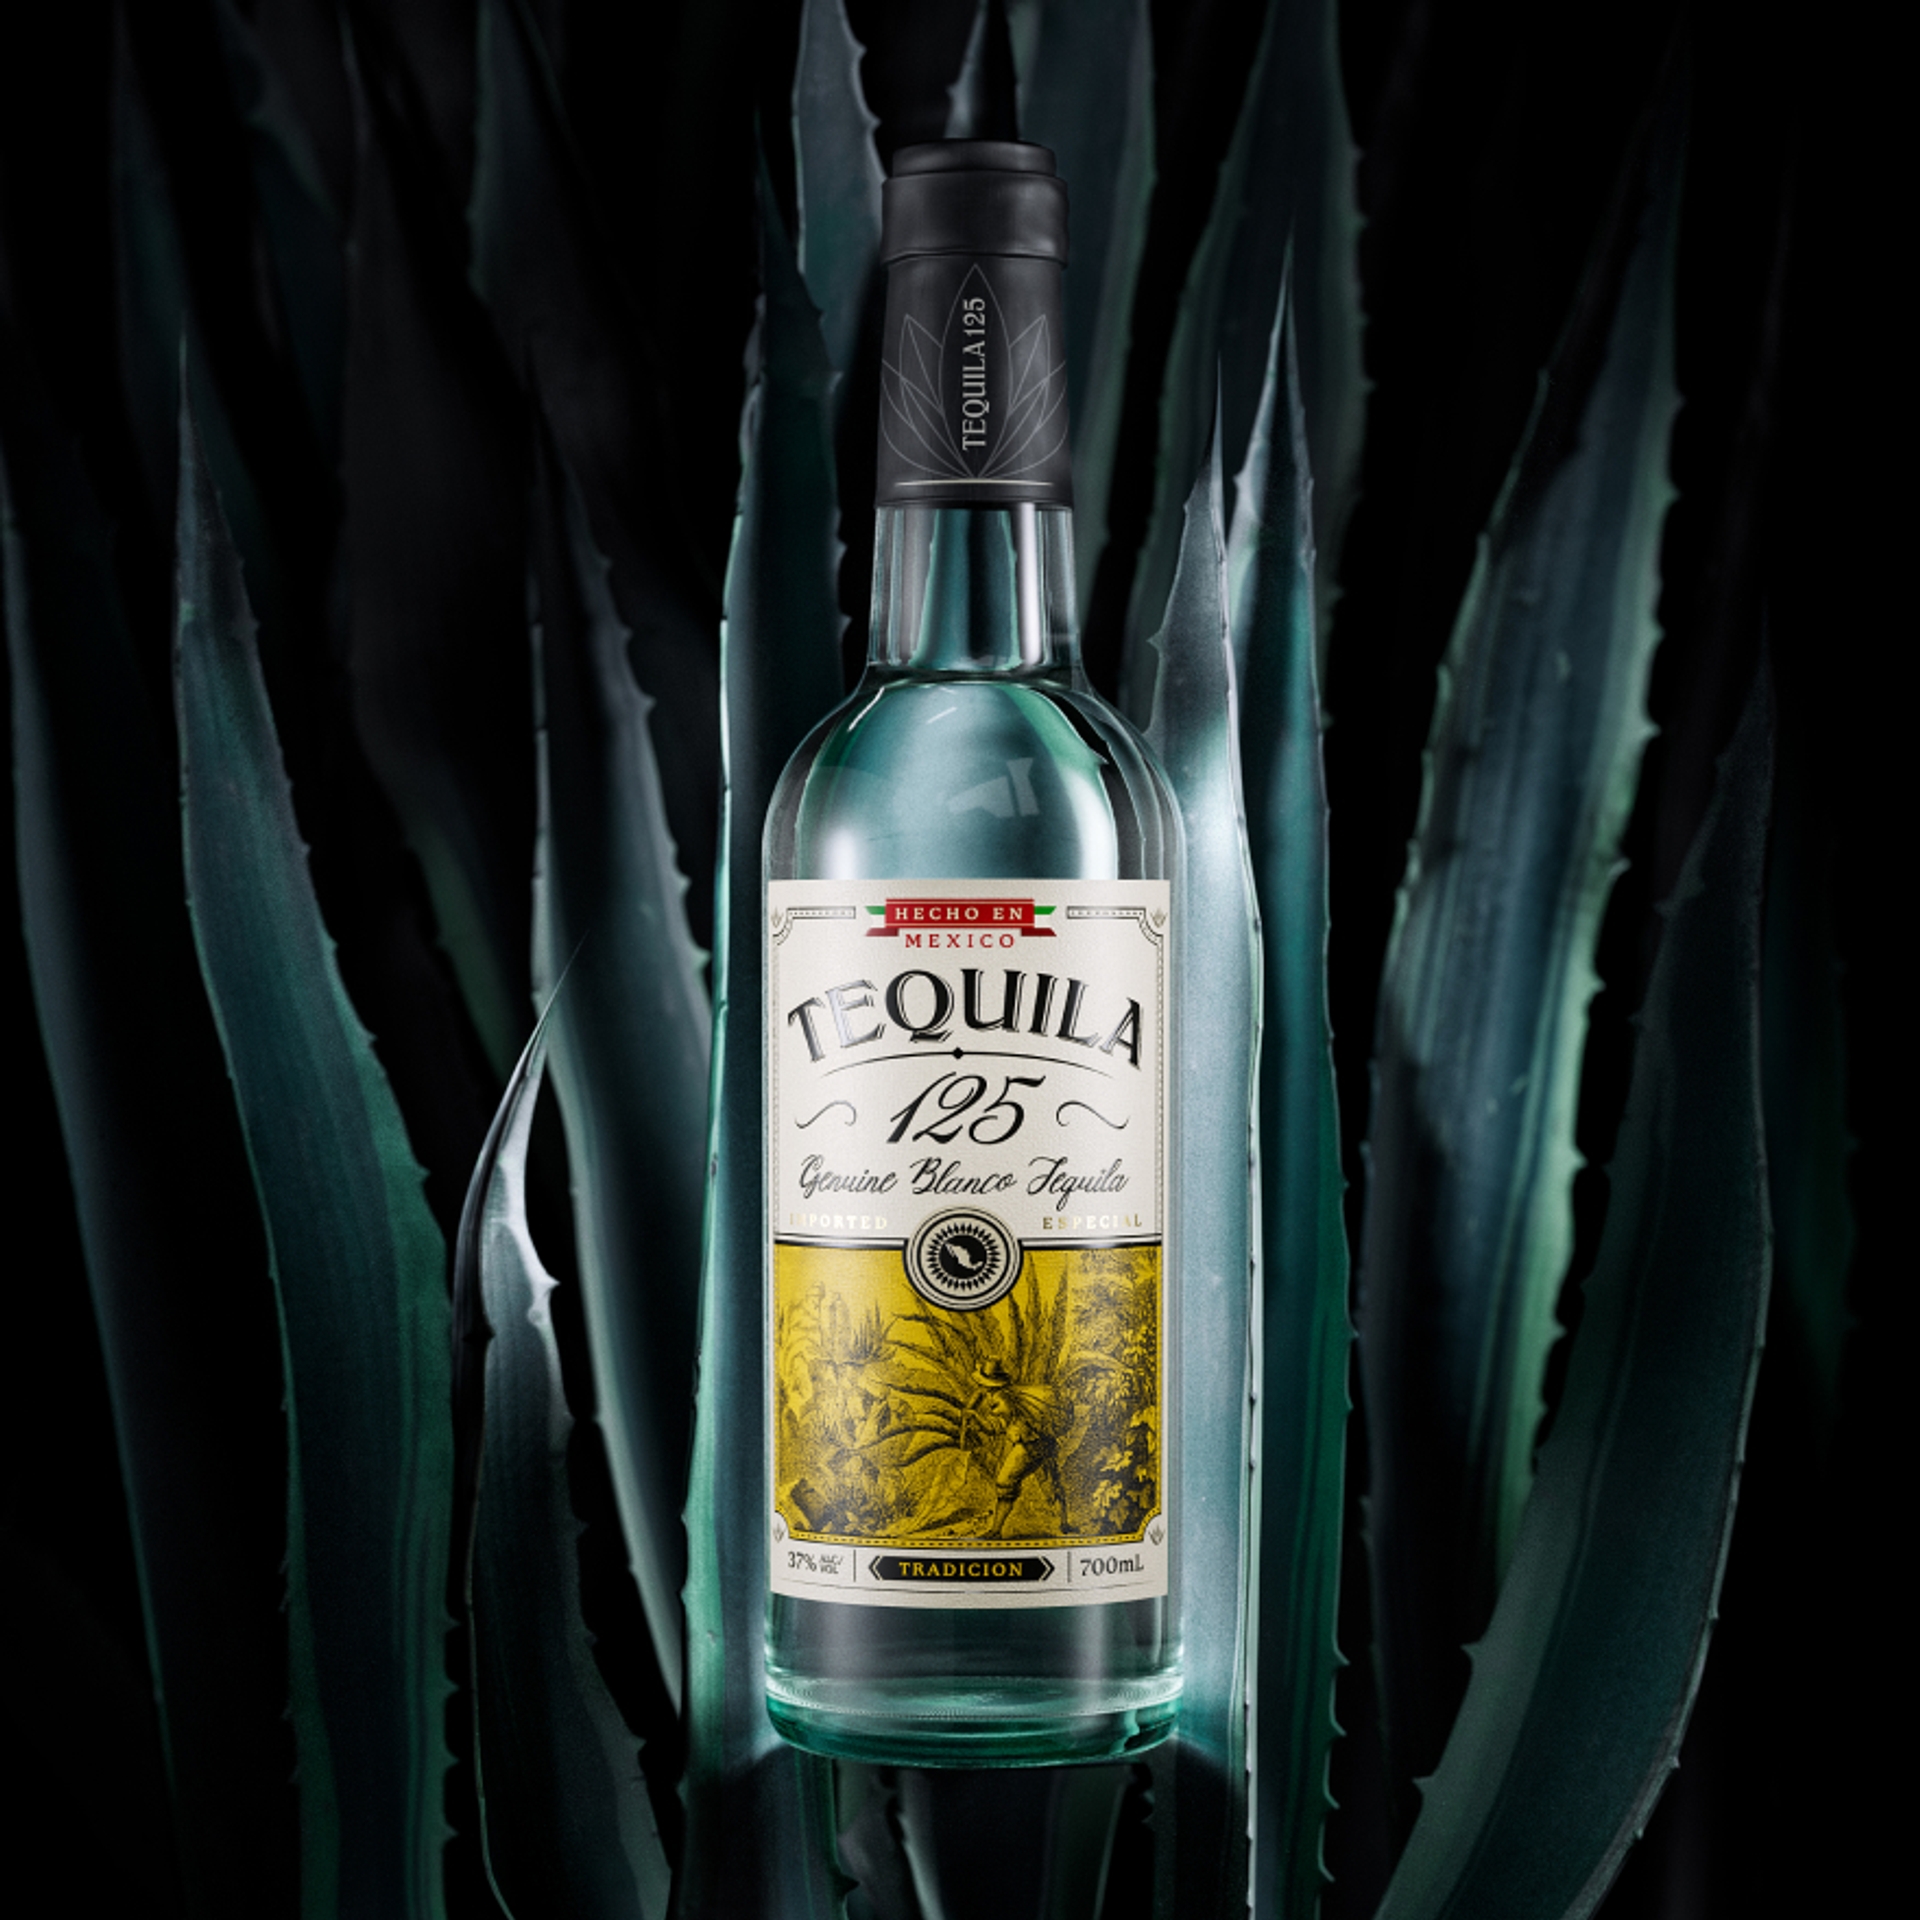 Tequila 125 brand and packaging design by Our Revolution, bottle illuminating surrounded by large agave plant leaves in darkness